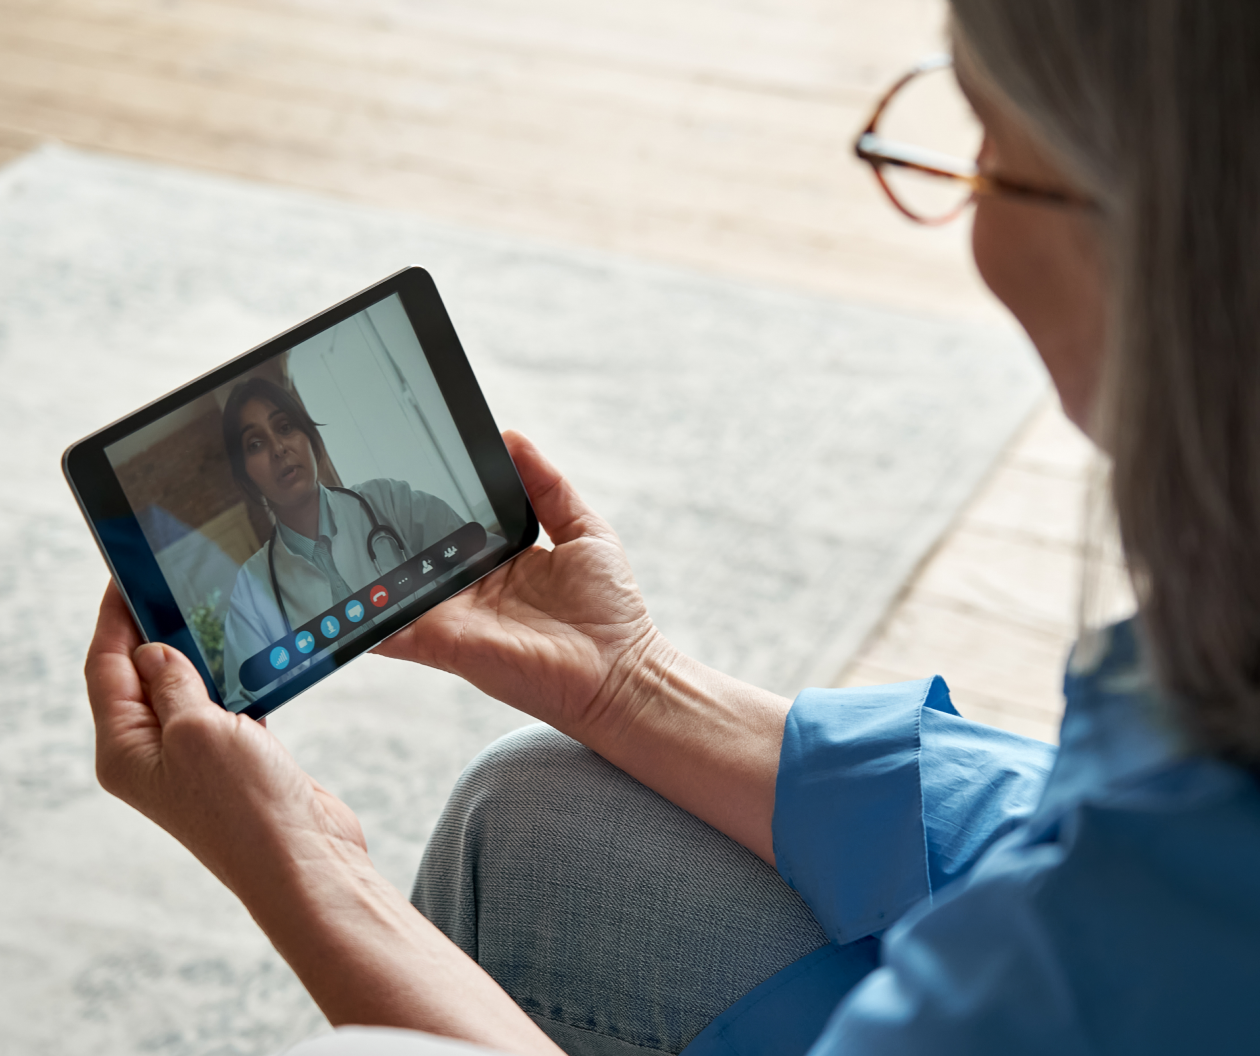 Guide to telehealth and telemedicine strategies R1hbapm